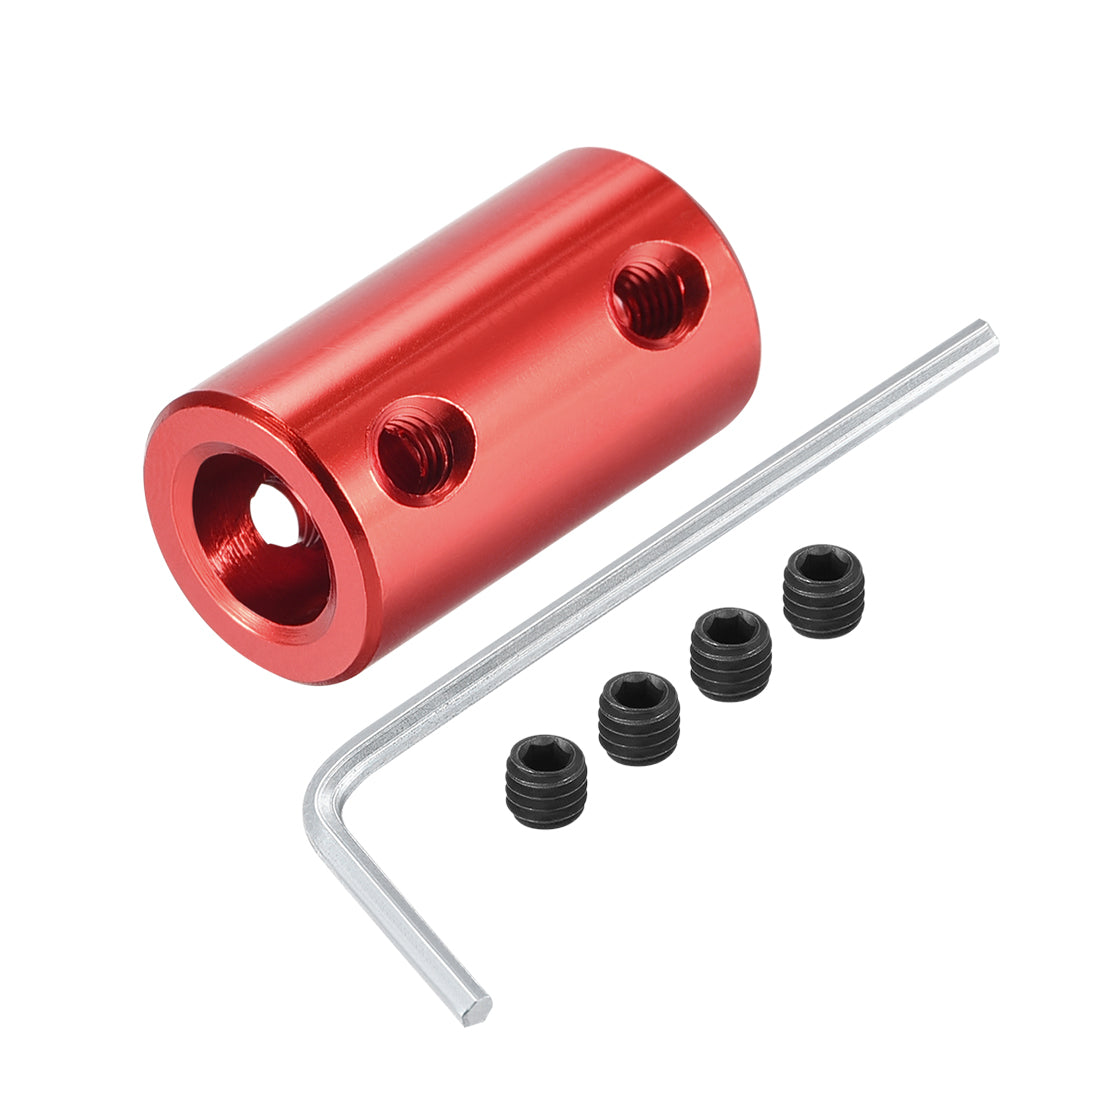 Uxcell Uxcell 3mm to 6mm Bore Rigid Coupling 25mm Length 14mm Diameter Aluminum Alloy Shaft Coupler Connector Red 4pcs